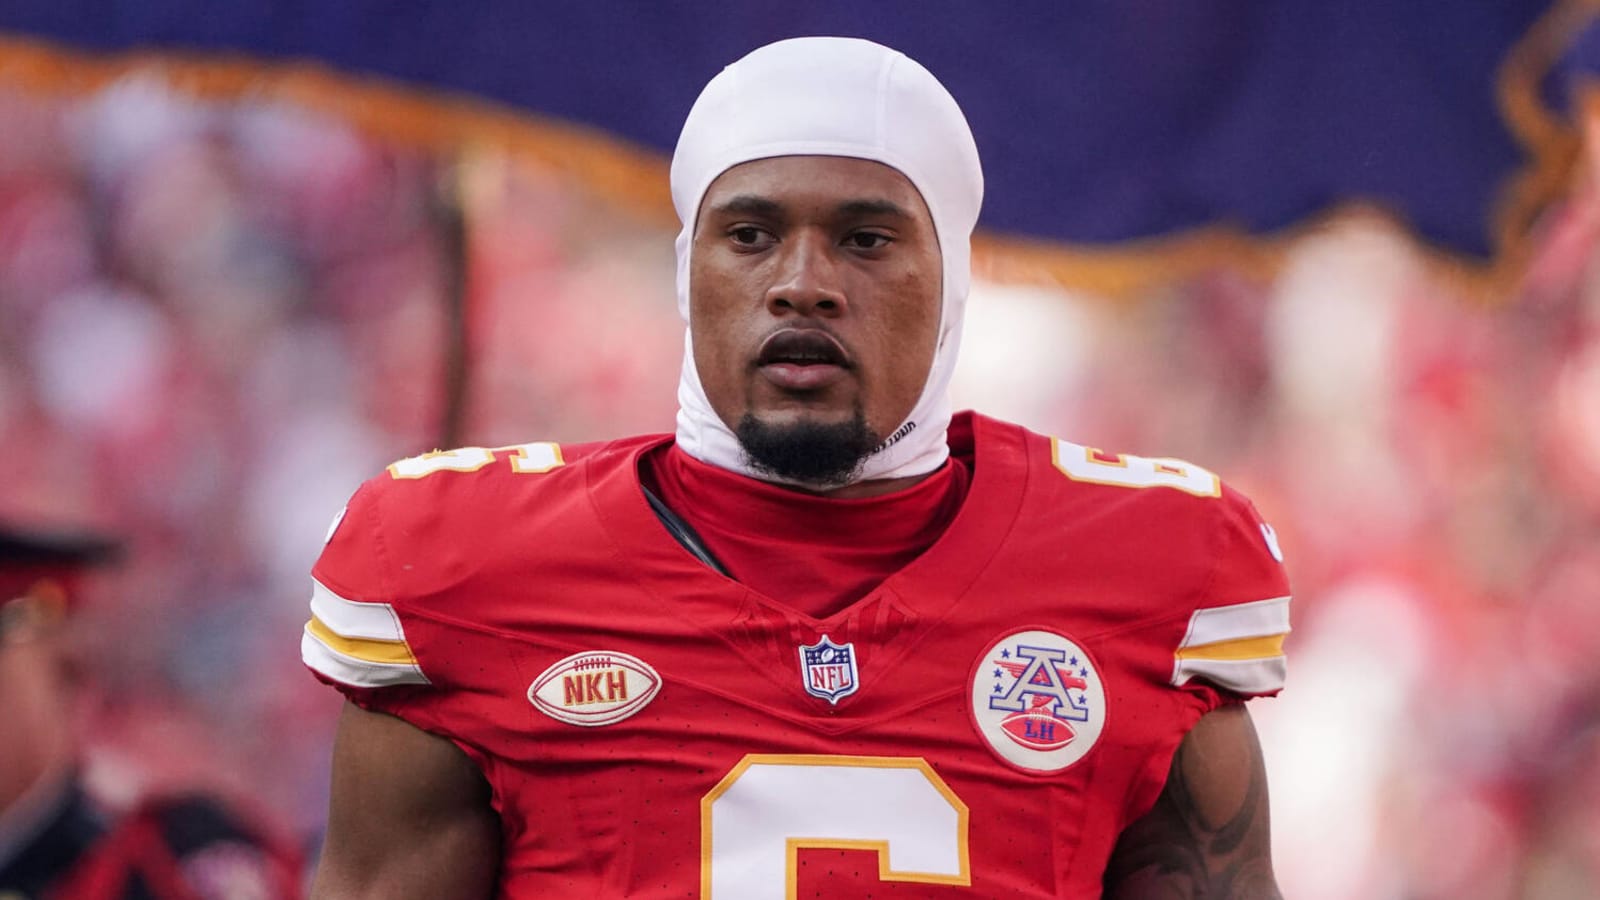 Chiefs place starting safety on IR